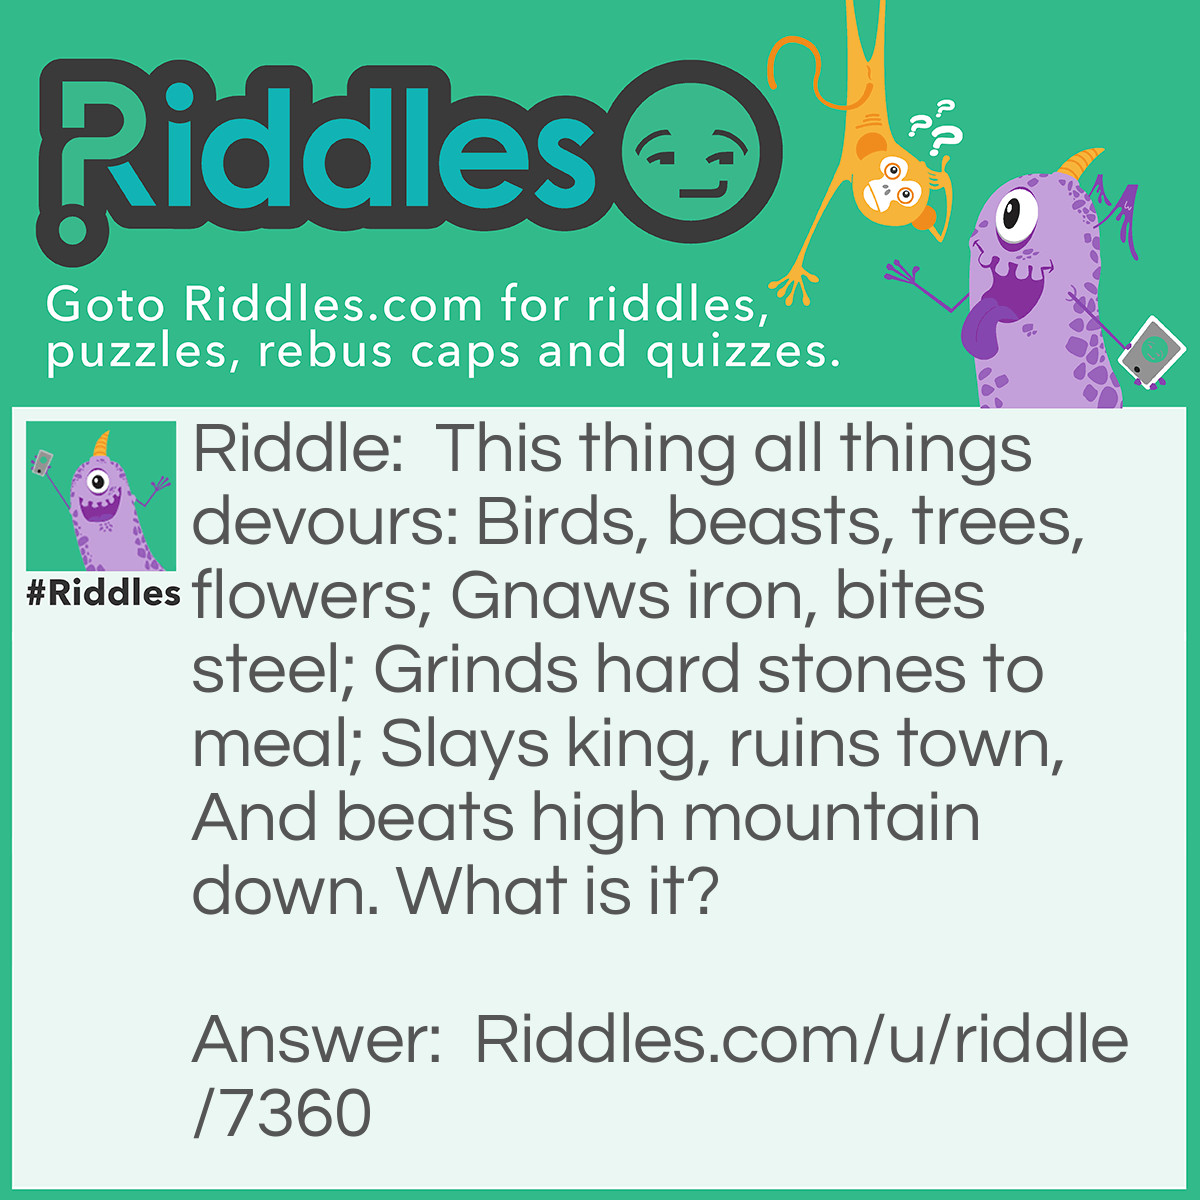 Riddle: This thing all things devours: Birds, beasts, trees, flowers; Gnaws iron, bites steel; Grinds hard stones to meal; Slays king, ruins town, And beats high mountain down. What is it? Answer: Time.